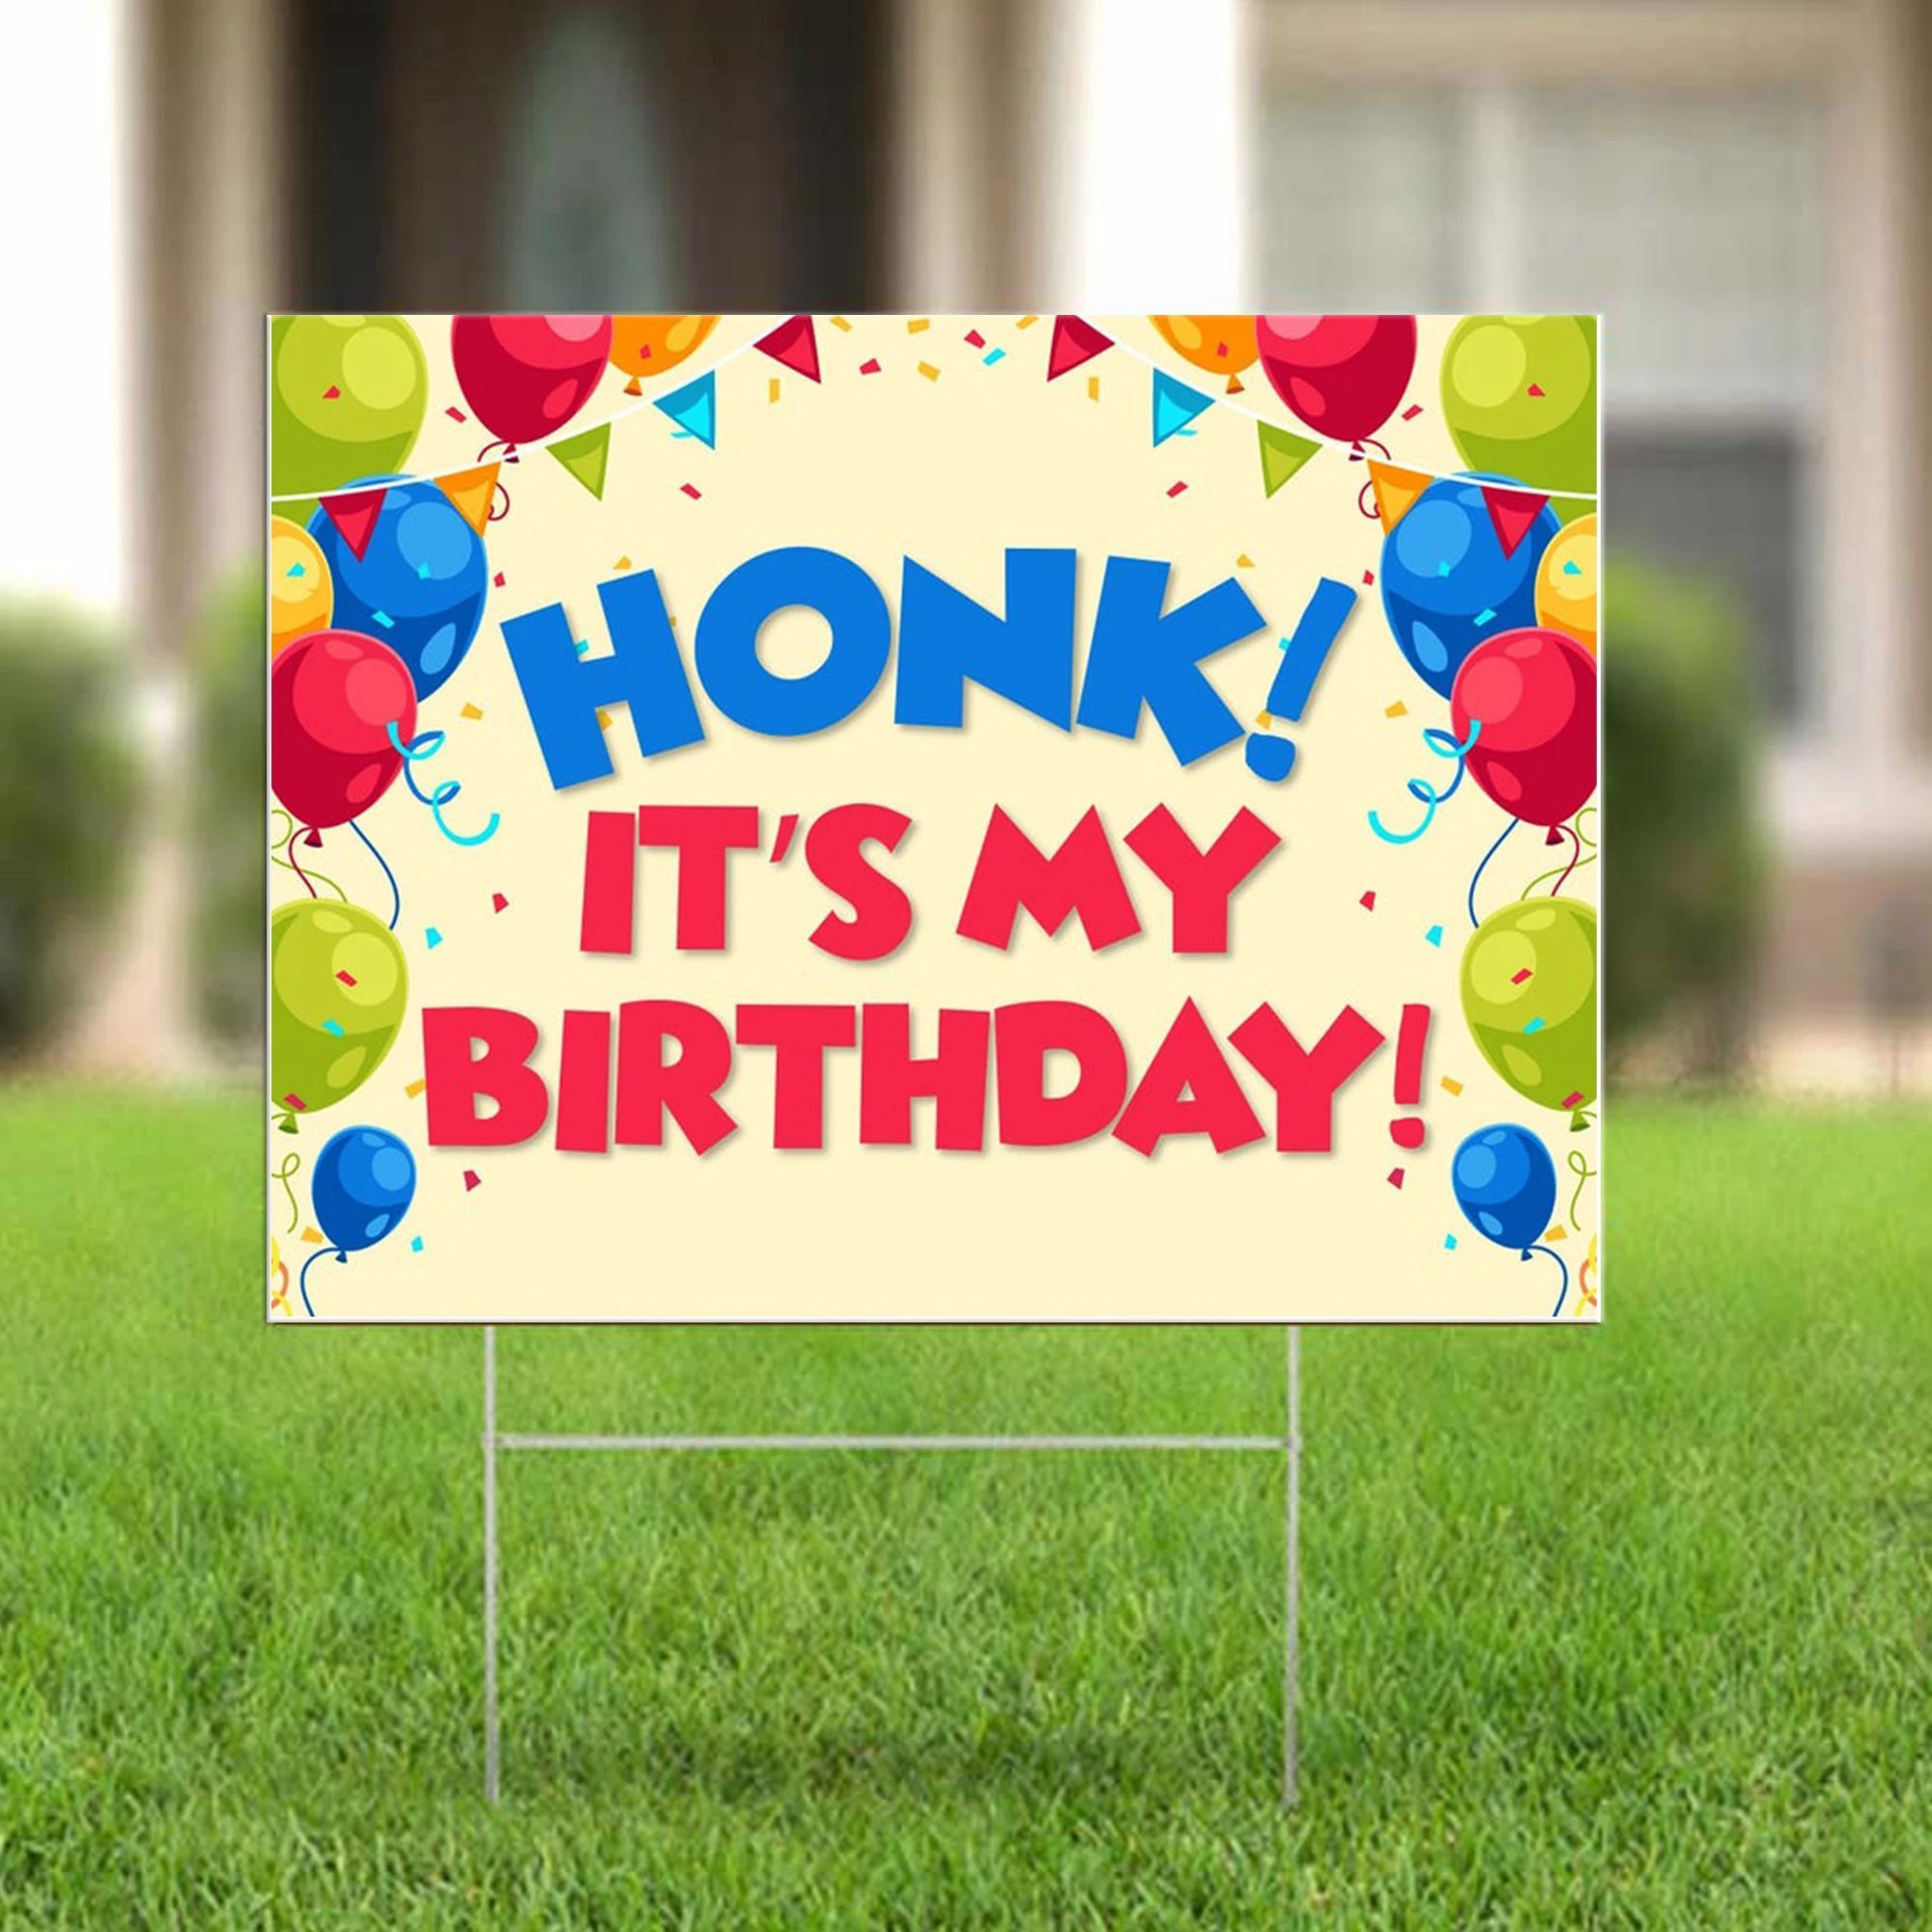 Honk It's My Birthday Yard Sign Christmas Gifts For Kids Lawn Yard Decor